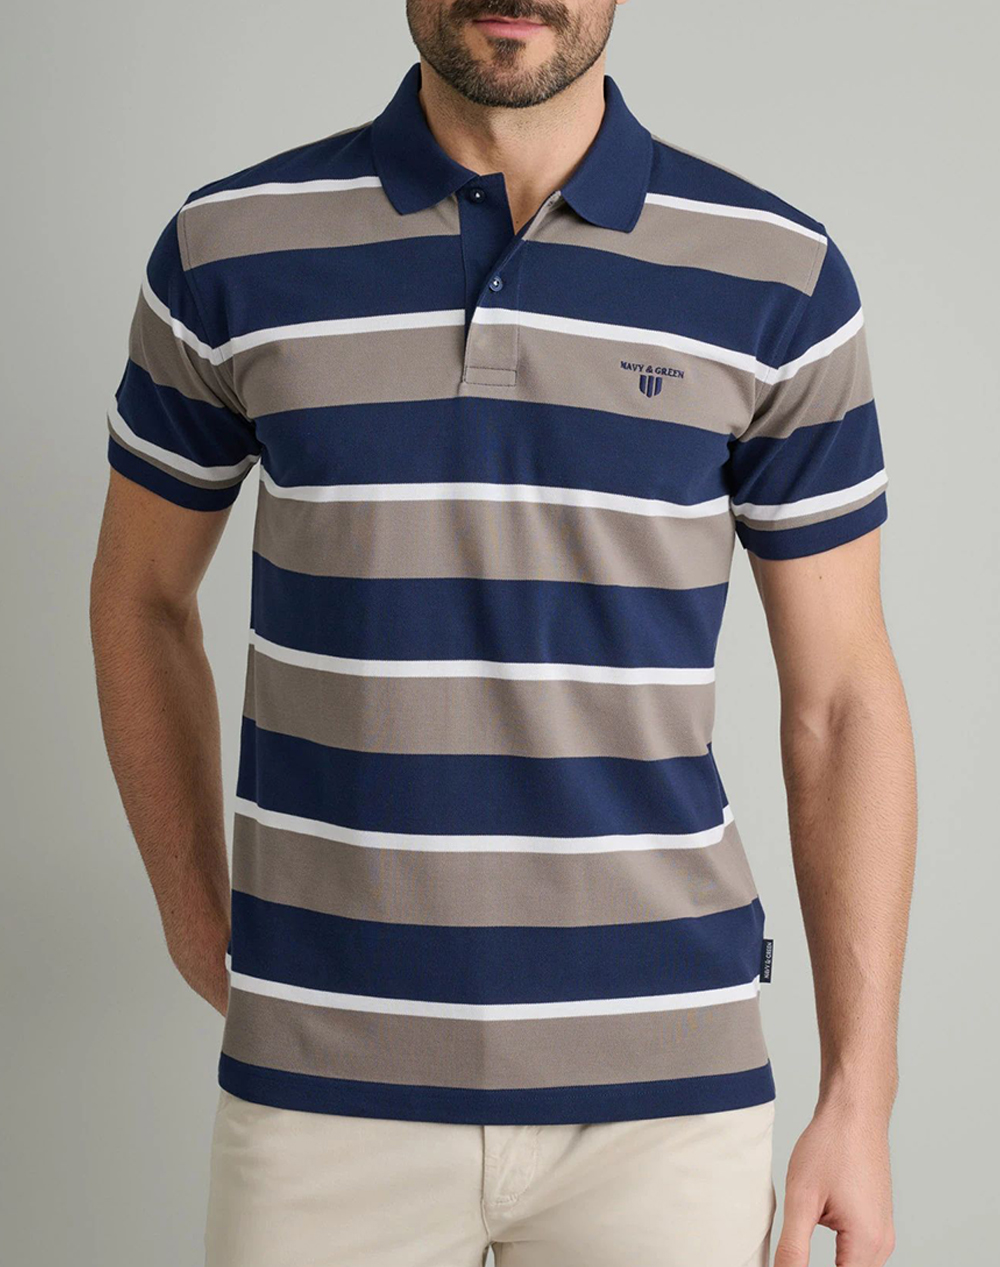 NAVY&GREEN POLO ΜΠΛΟΥΖΑΚΙ-CUSTOM FIT 24GE.1026-MD BLUE/METALLO Mixed 3820PNAVY3410096_XR16533